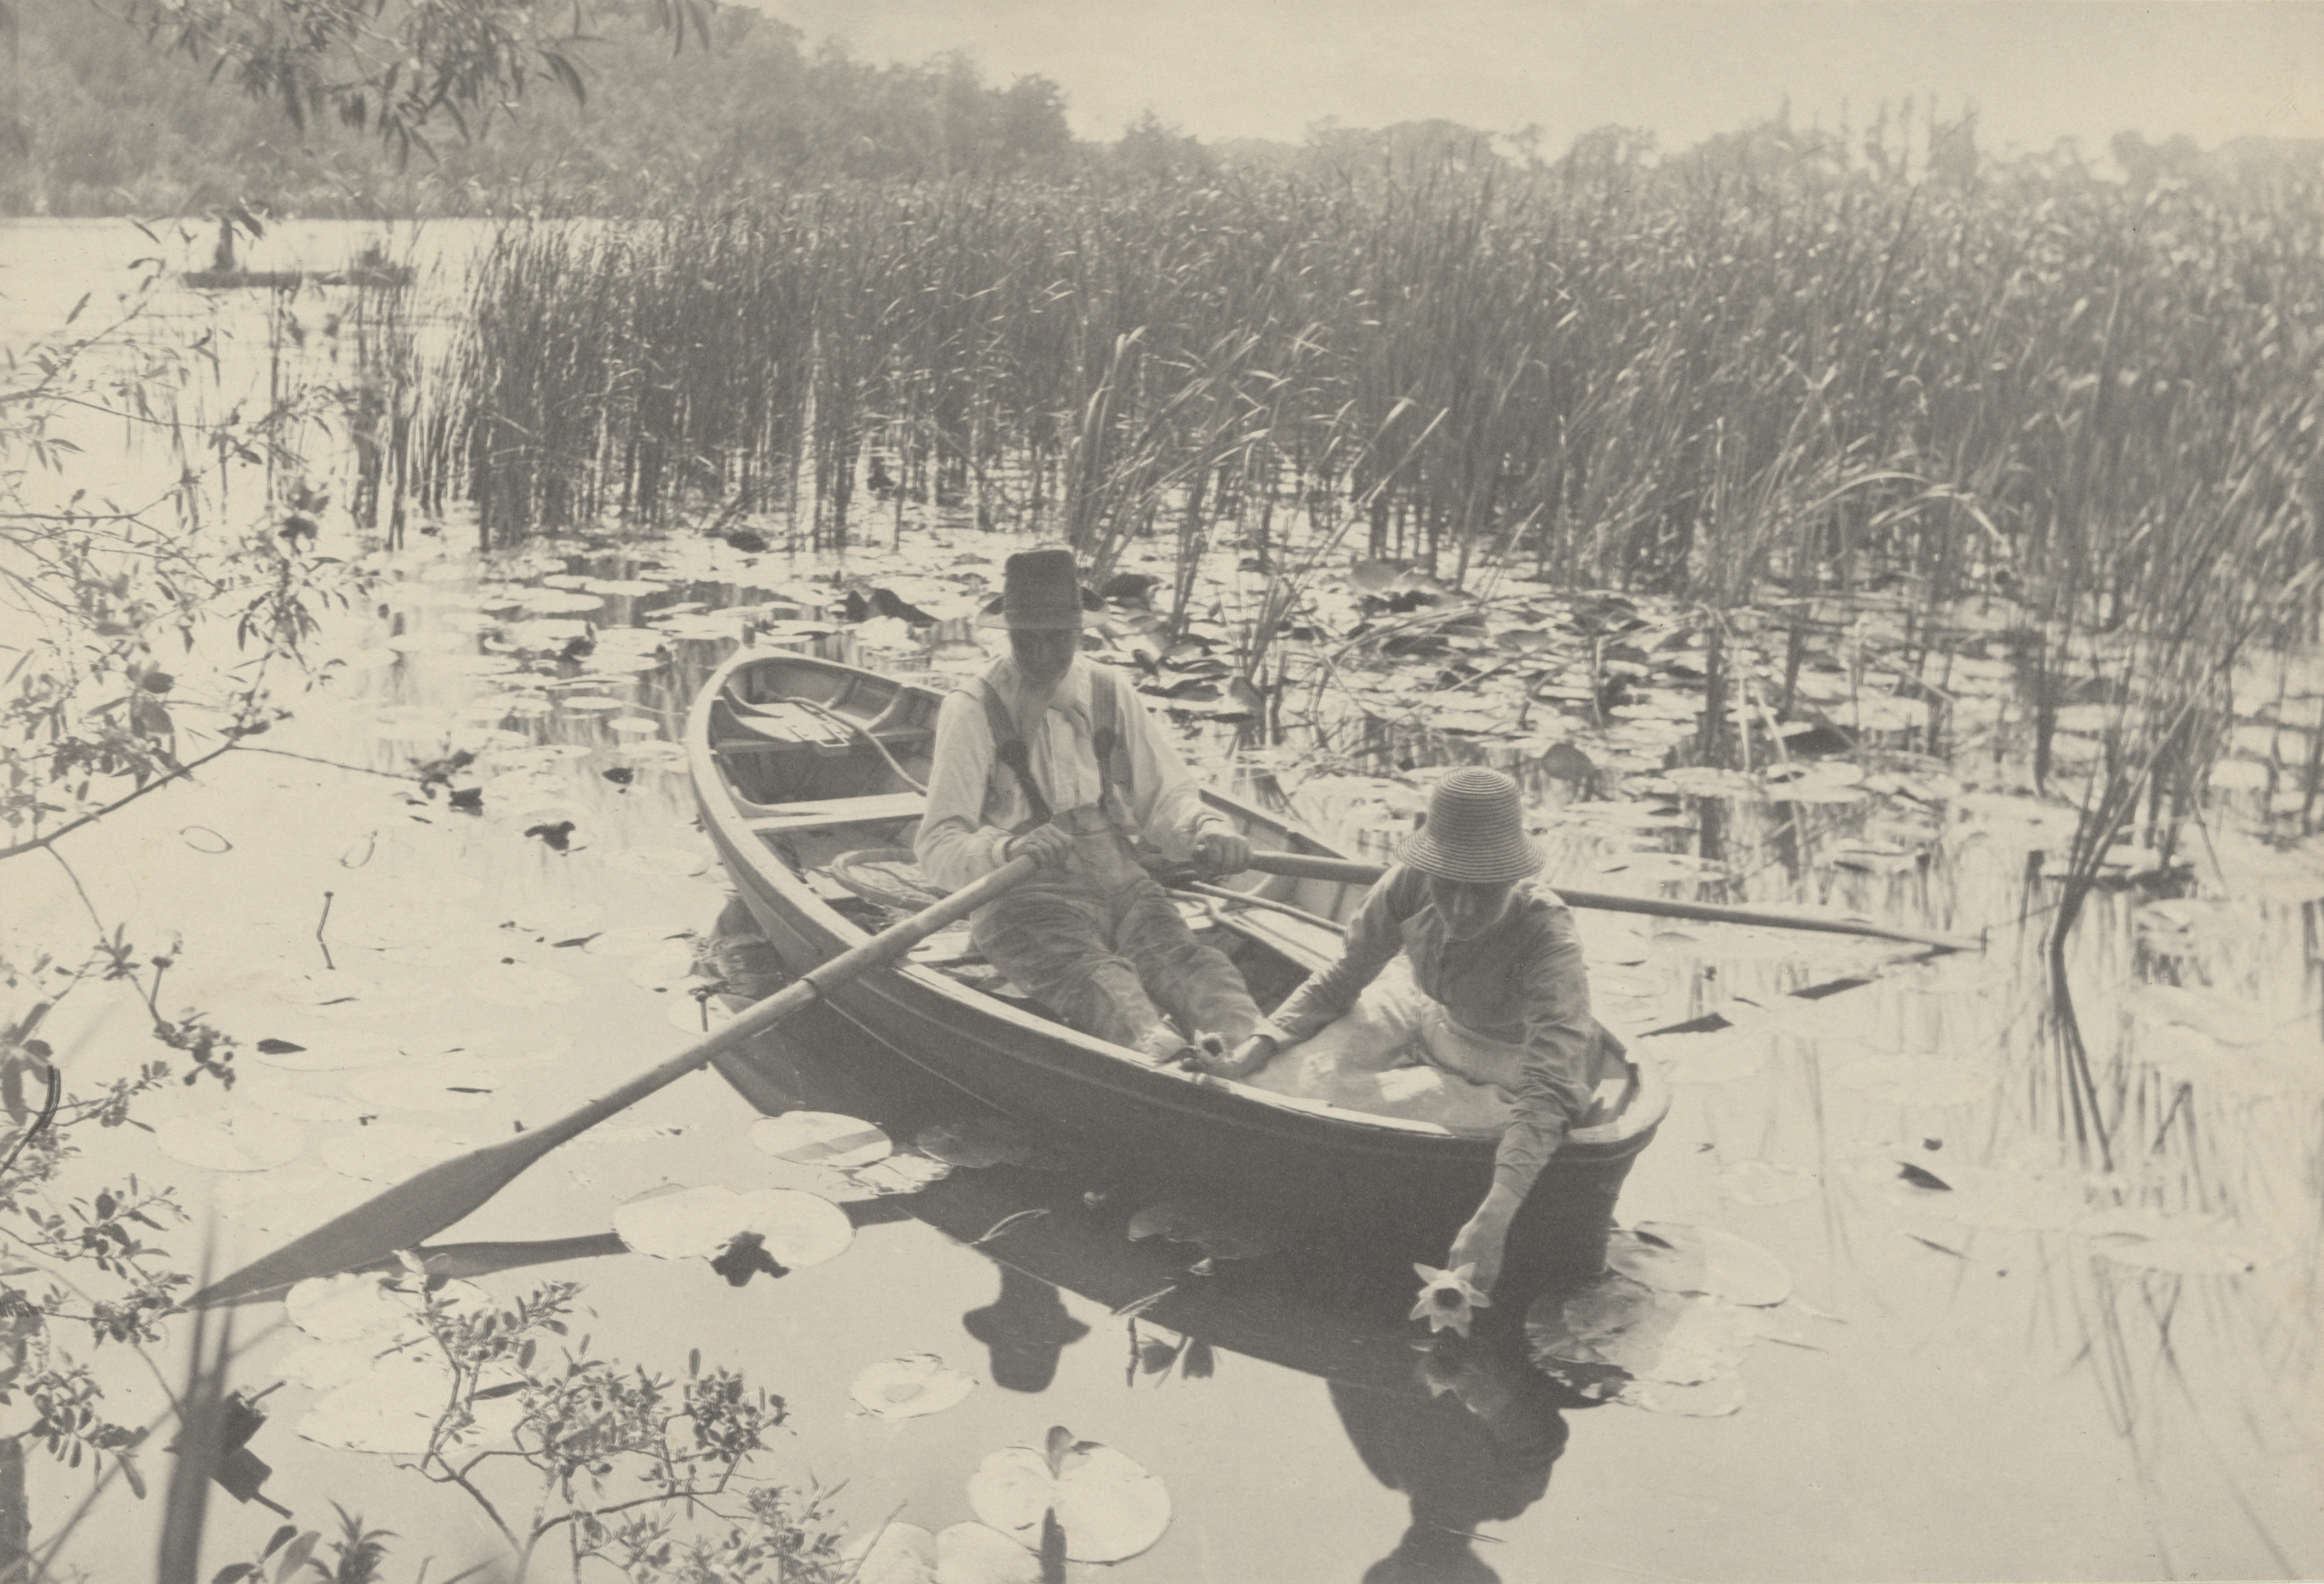 Black and white photograph of two people on a rowboat gathering water lilies. Rowing art by Peter Henry Emerson